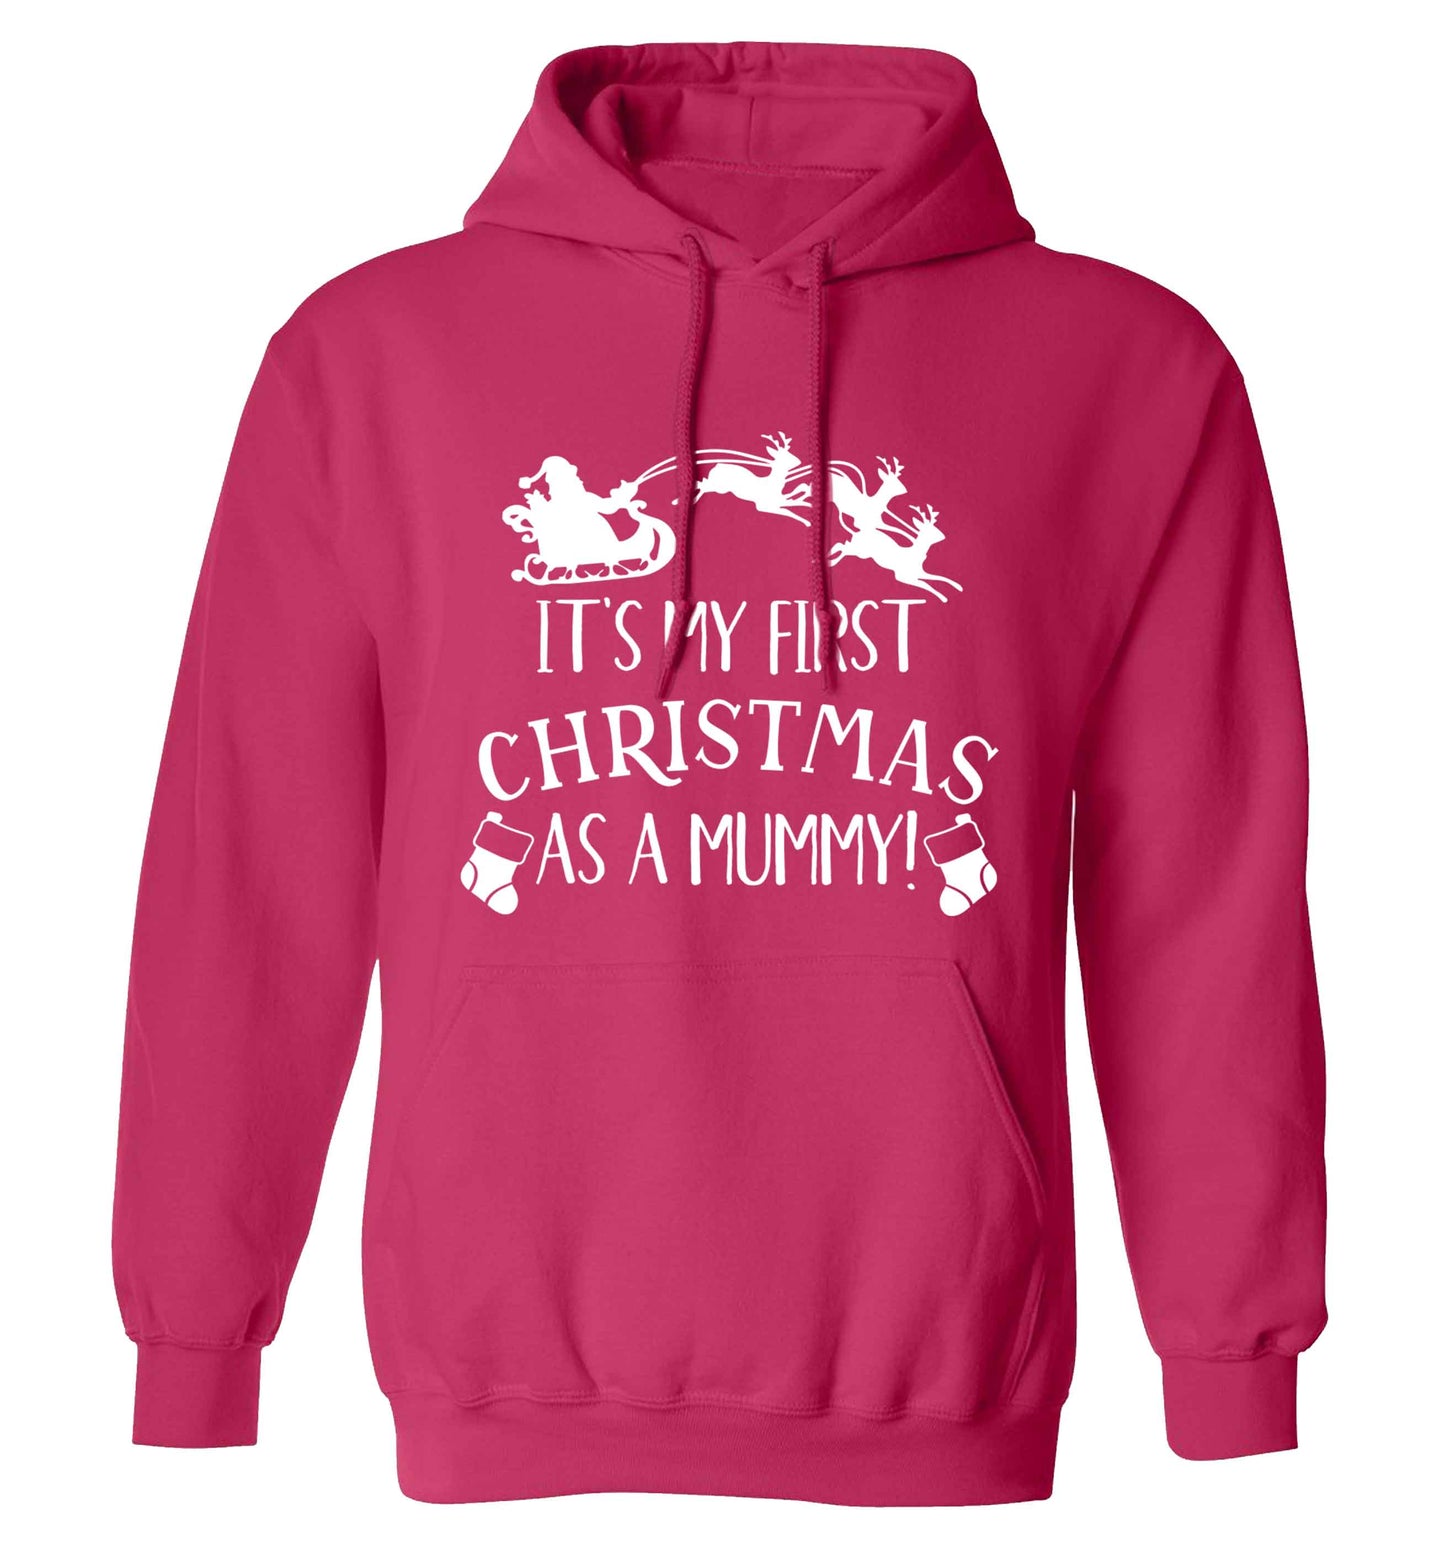 It's my first Christmas as a mummy adults unisex pink hoodie 2XL